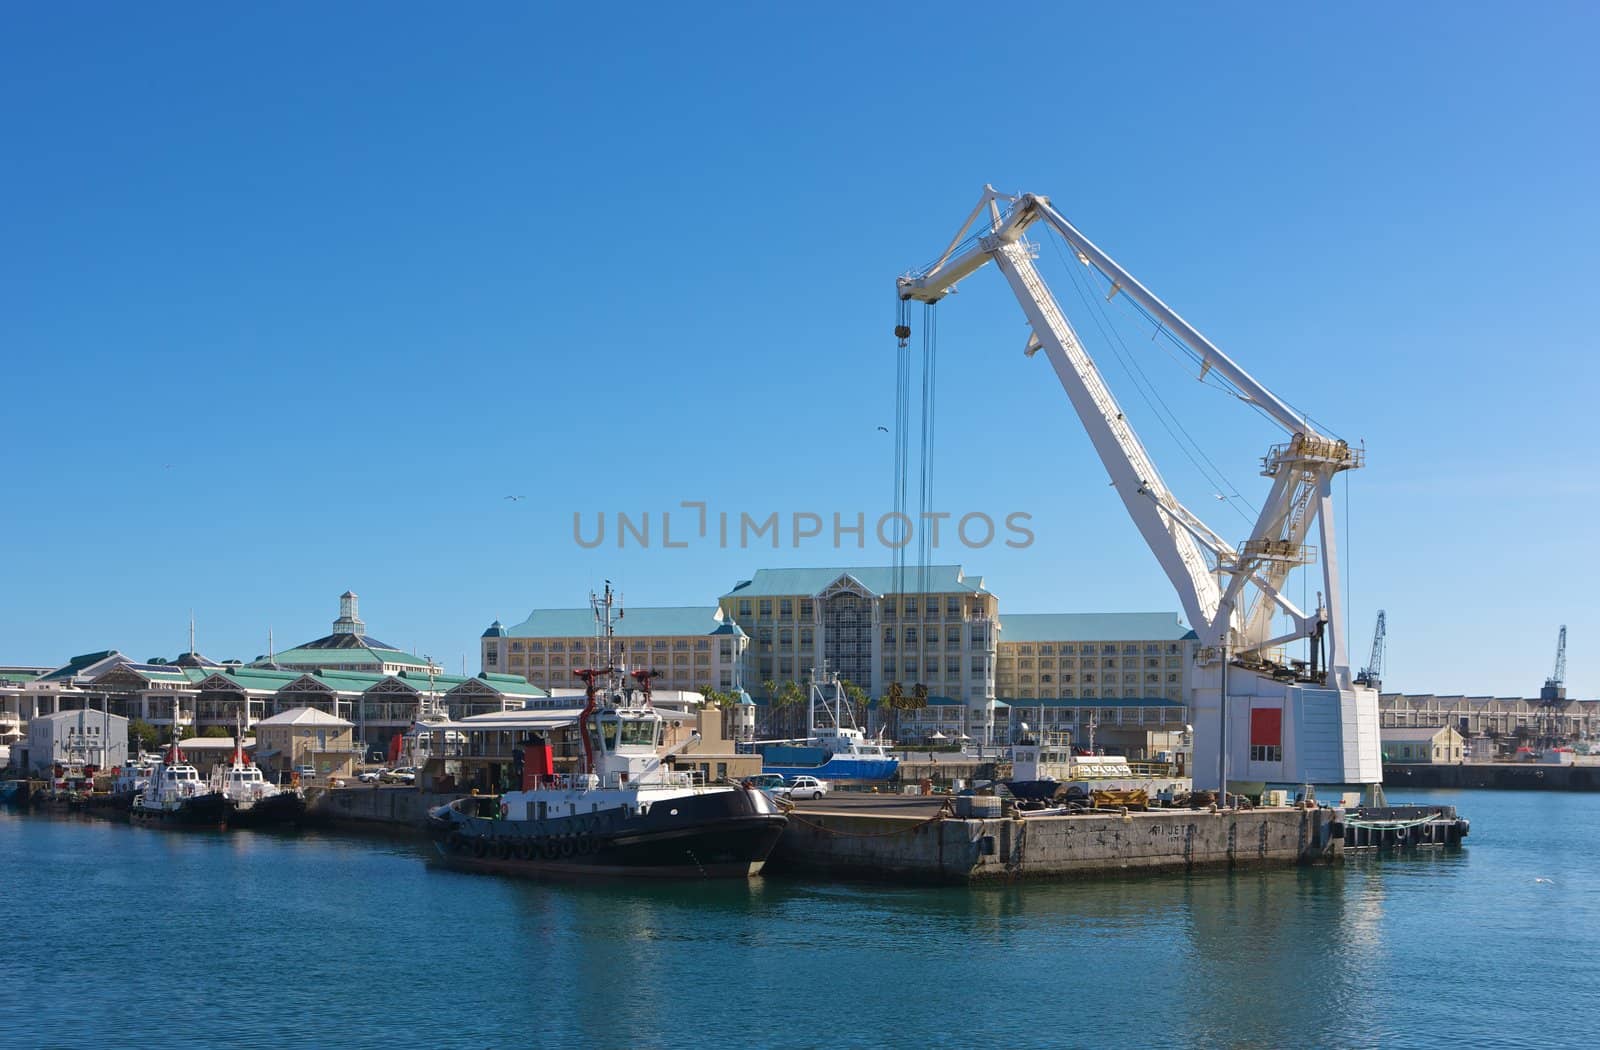 South Africa, Cape Town, harbor